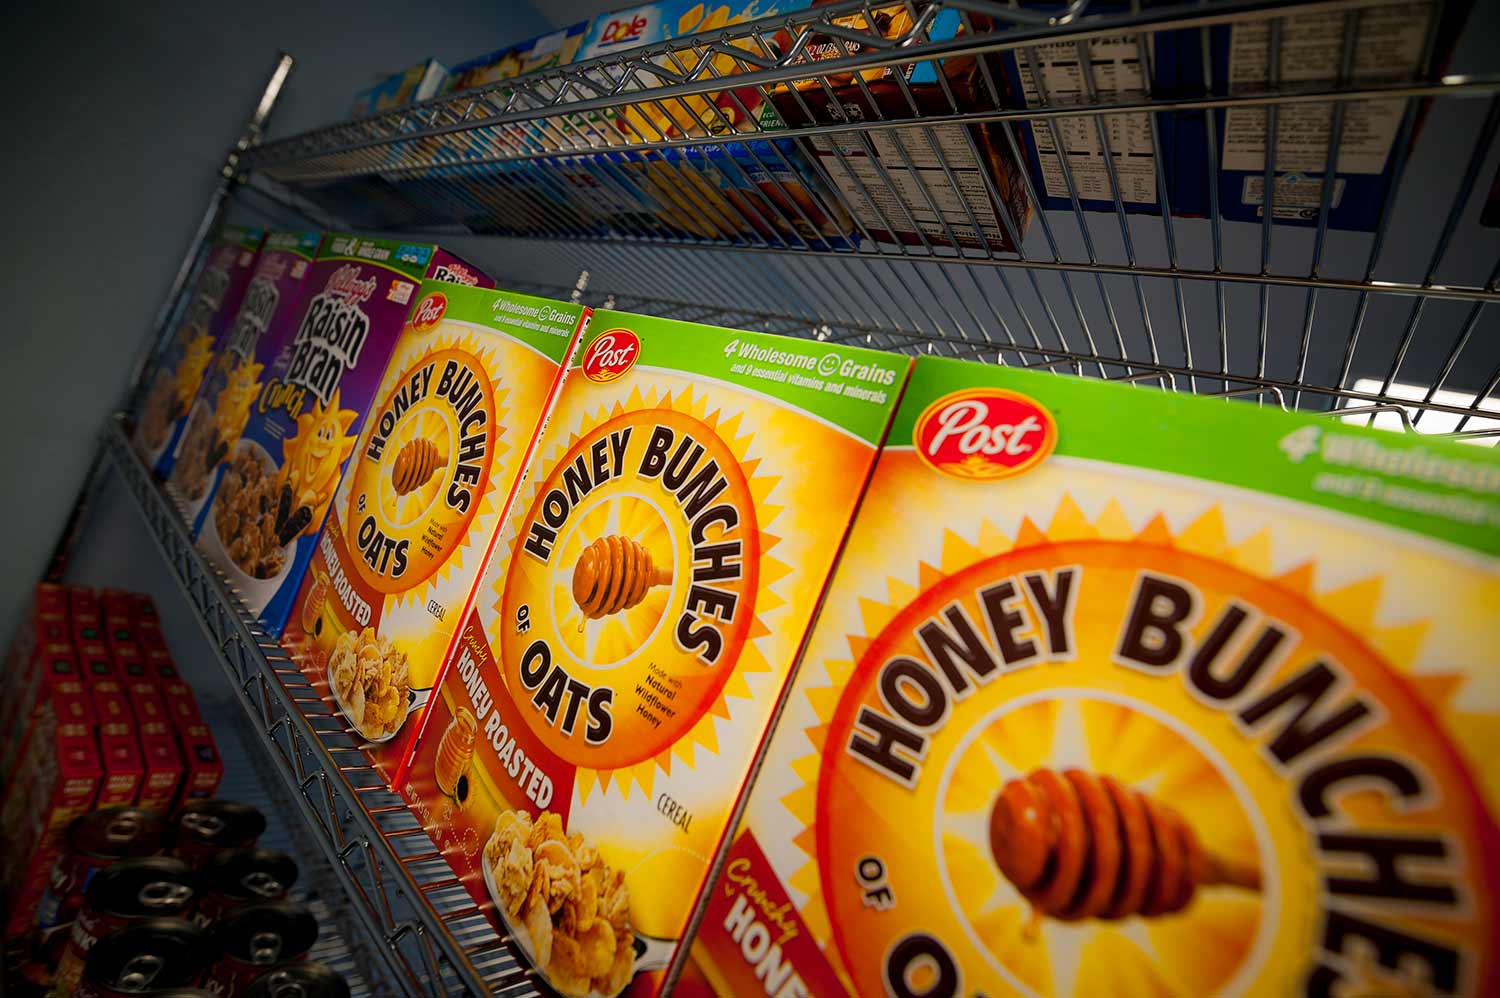 Boxes of cereals